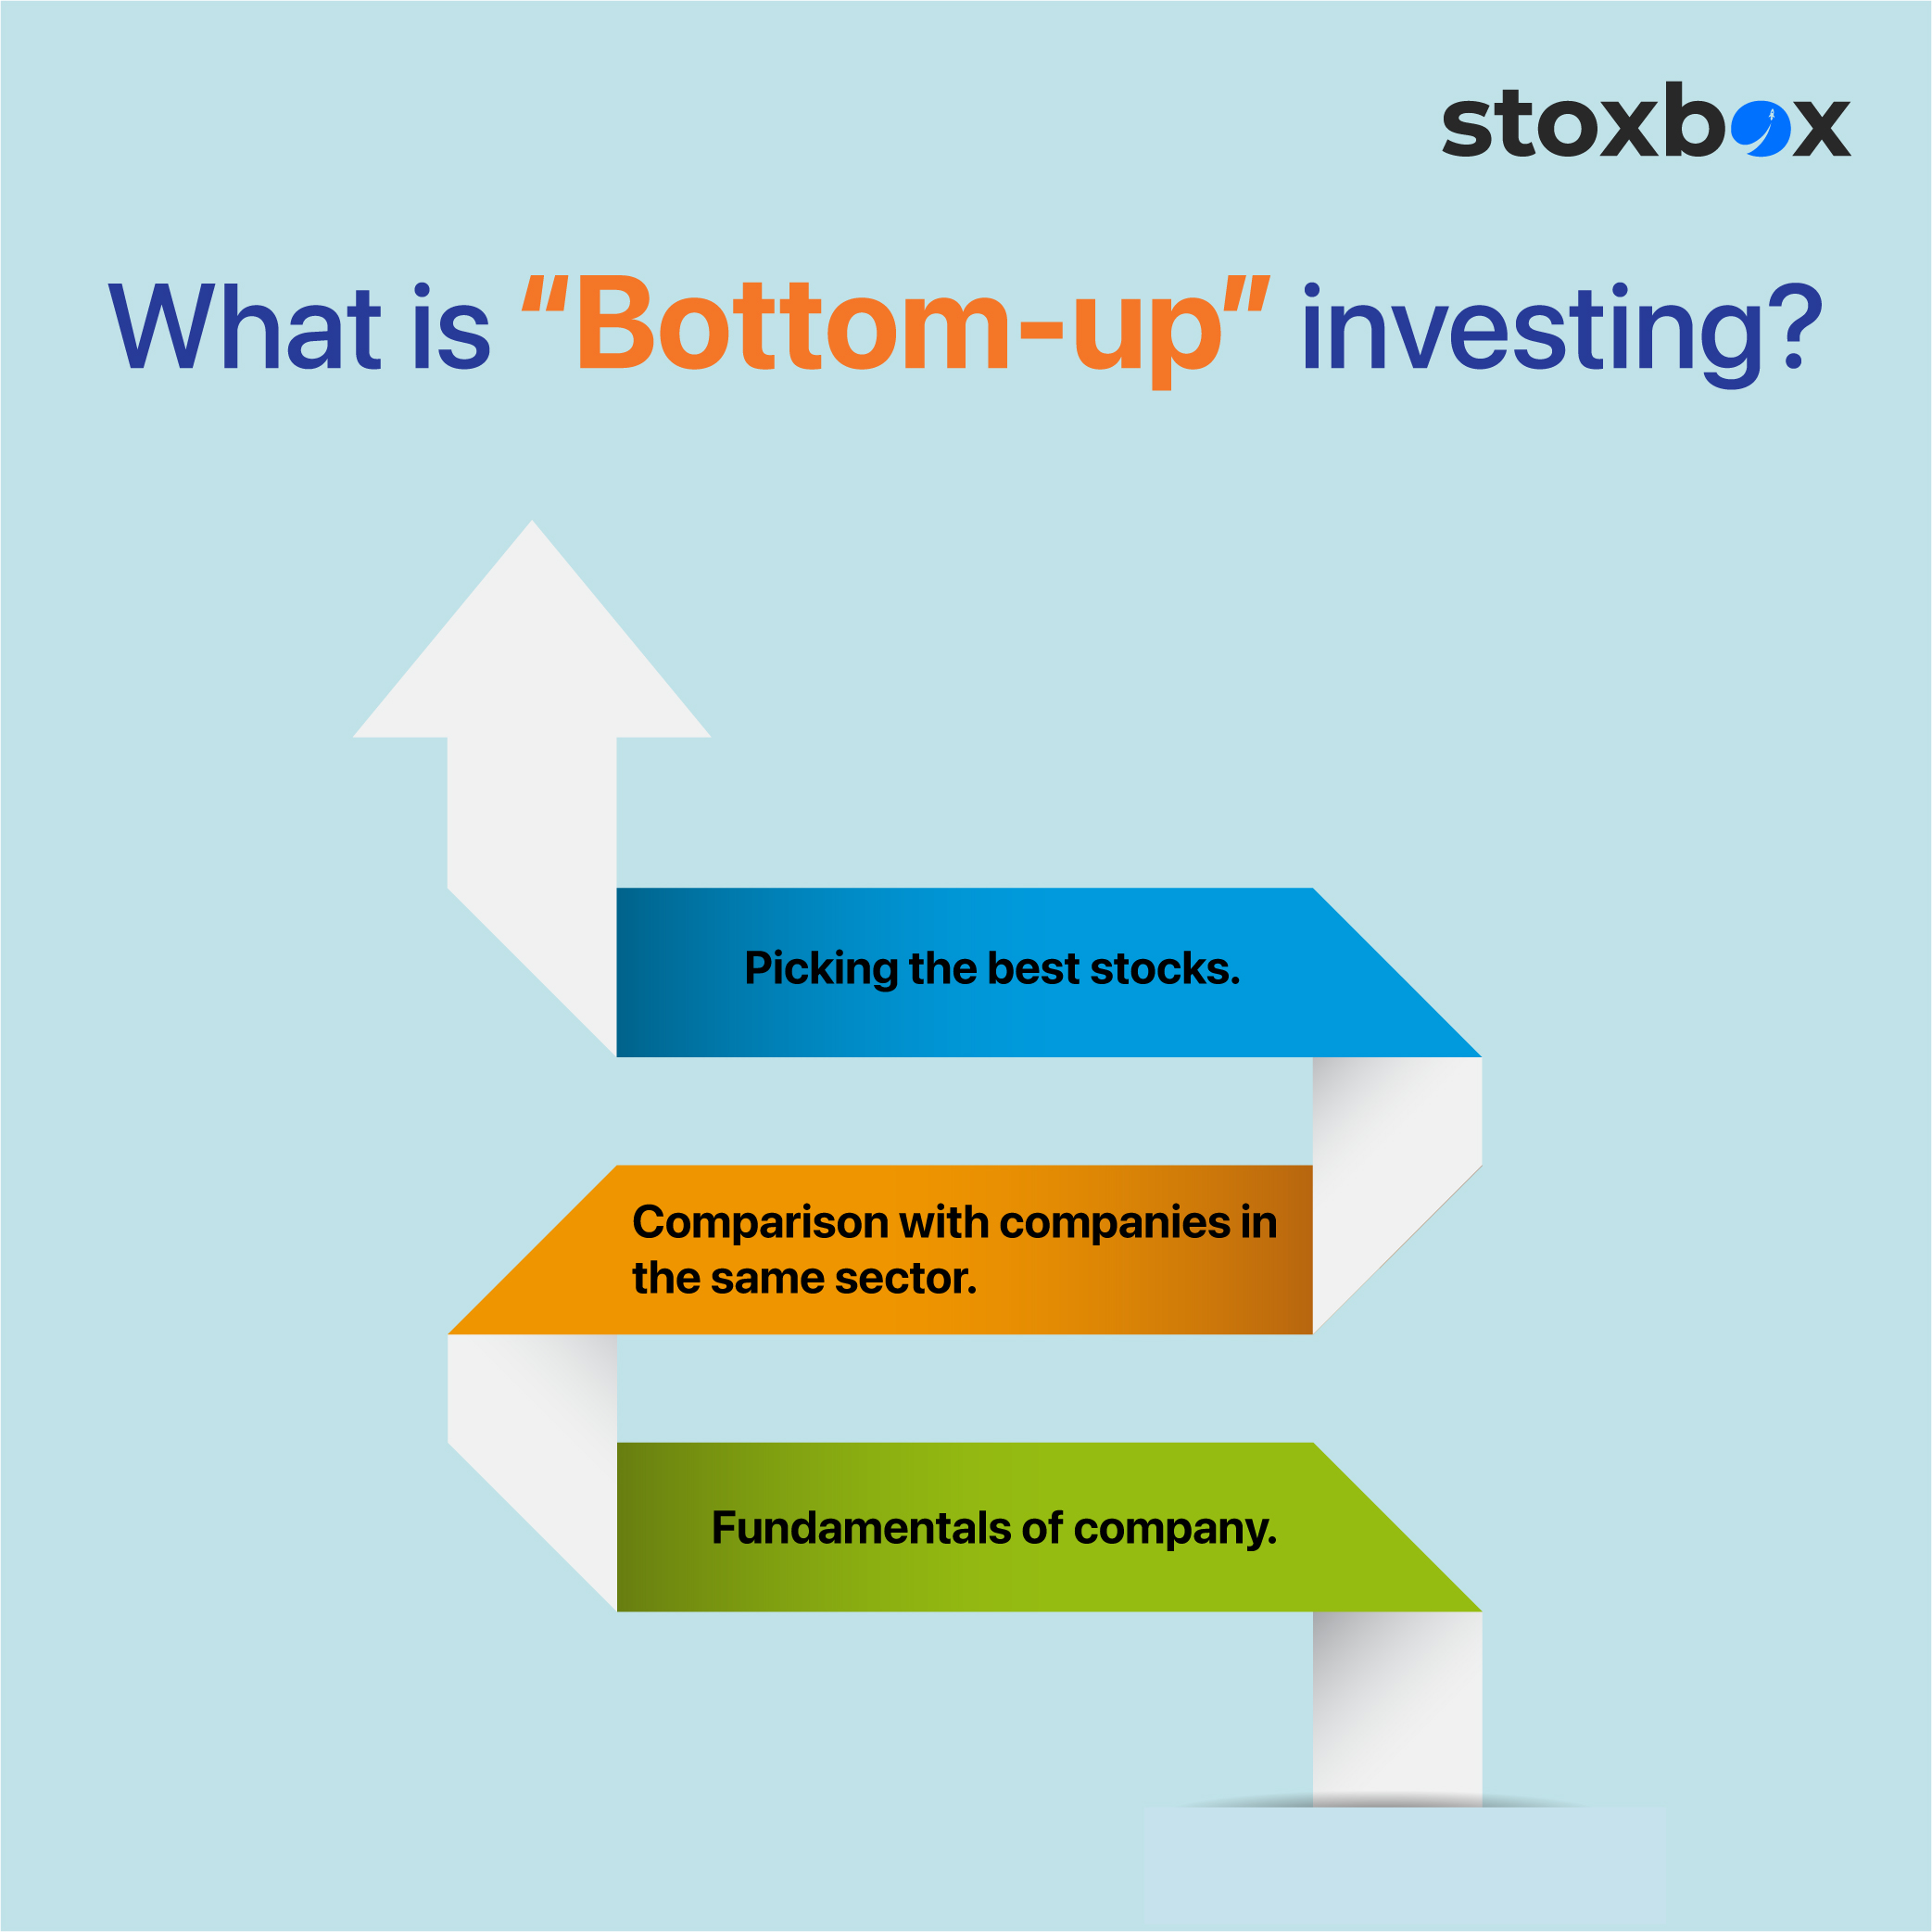 How do “top-down” and “bottom-up” investing differ